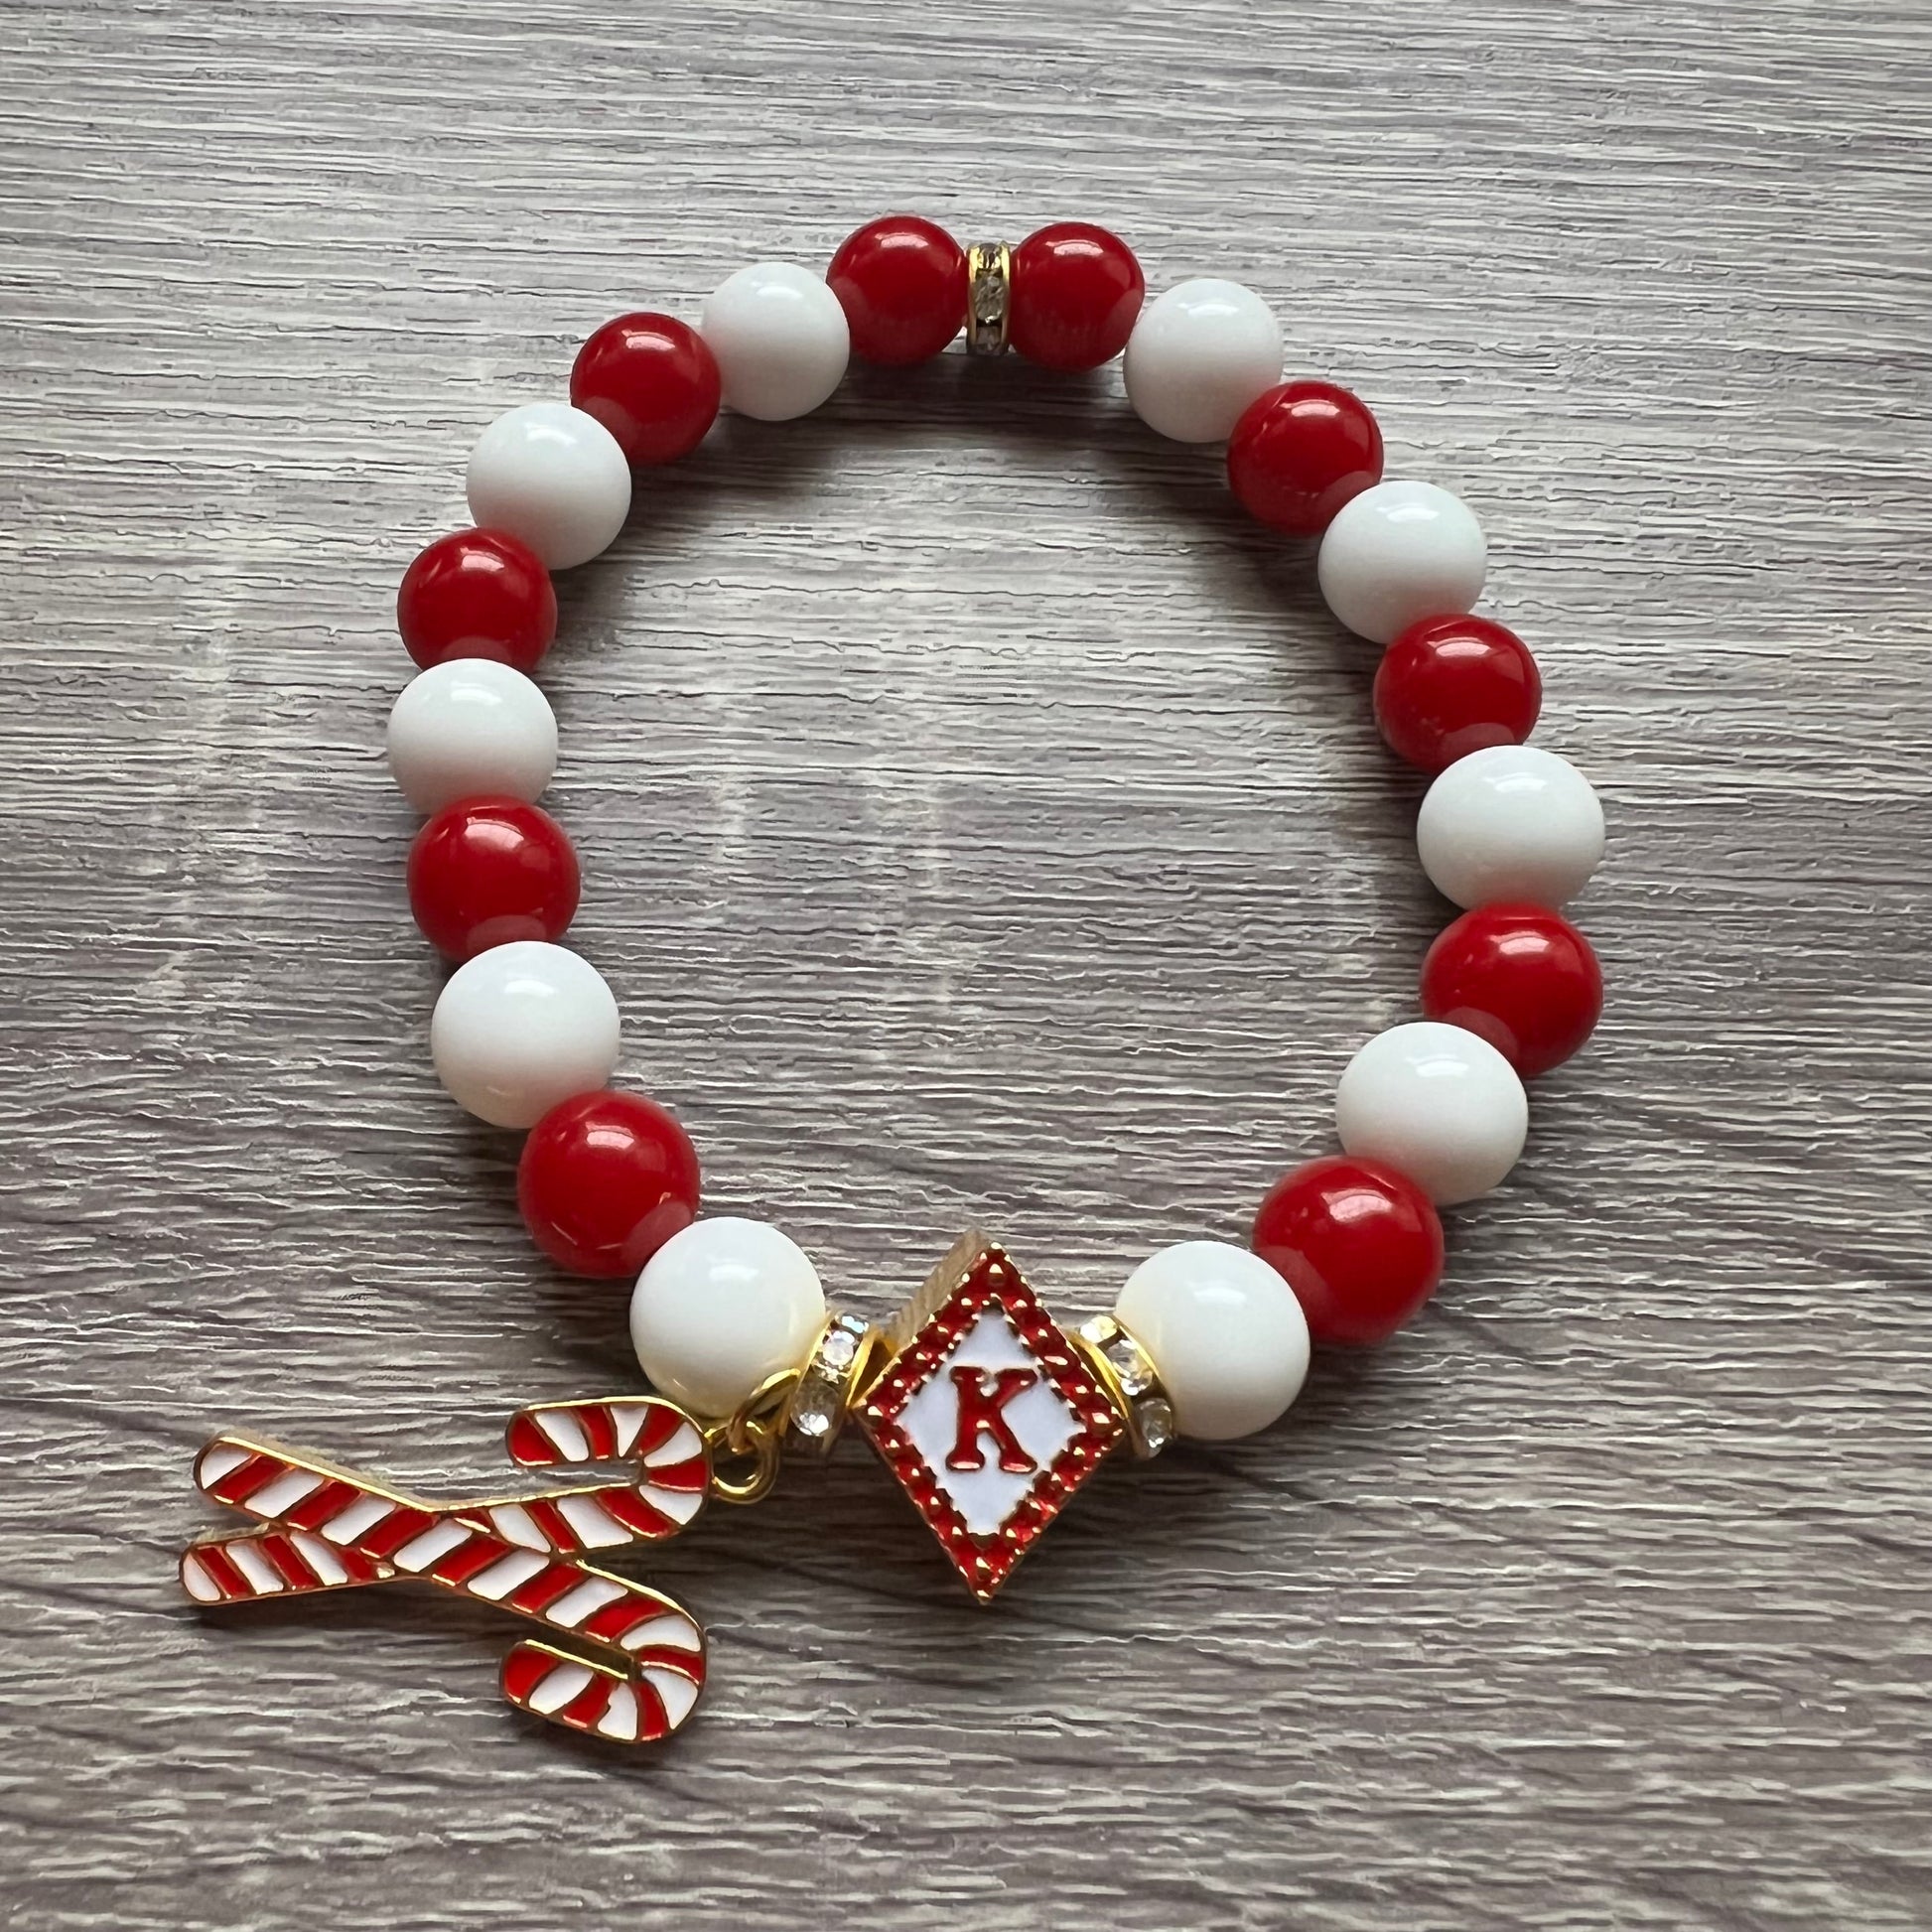 Kappa Alpha Psi fraternity exclusive Glass Beaded Bracelet on elastic stretch rope; simple and elegant. Easy bracelet to slide on and off wrist. The color of amber beads may vary from bracelet to bracelet due to each bracelet being hand made from natural materials with a personal touch.